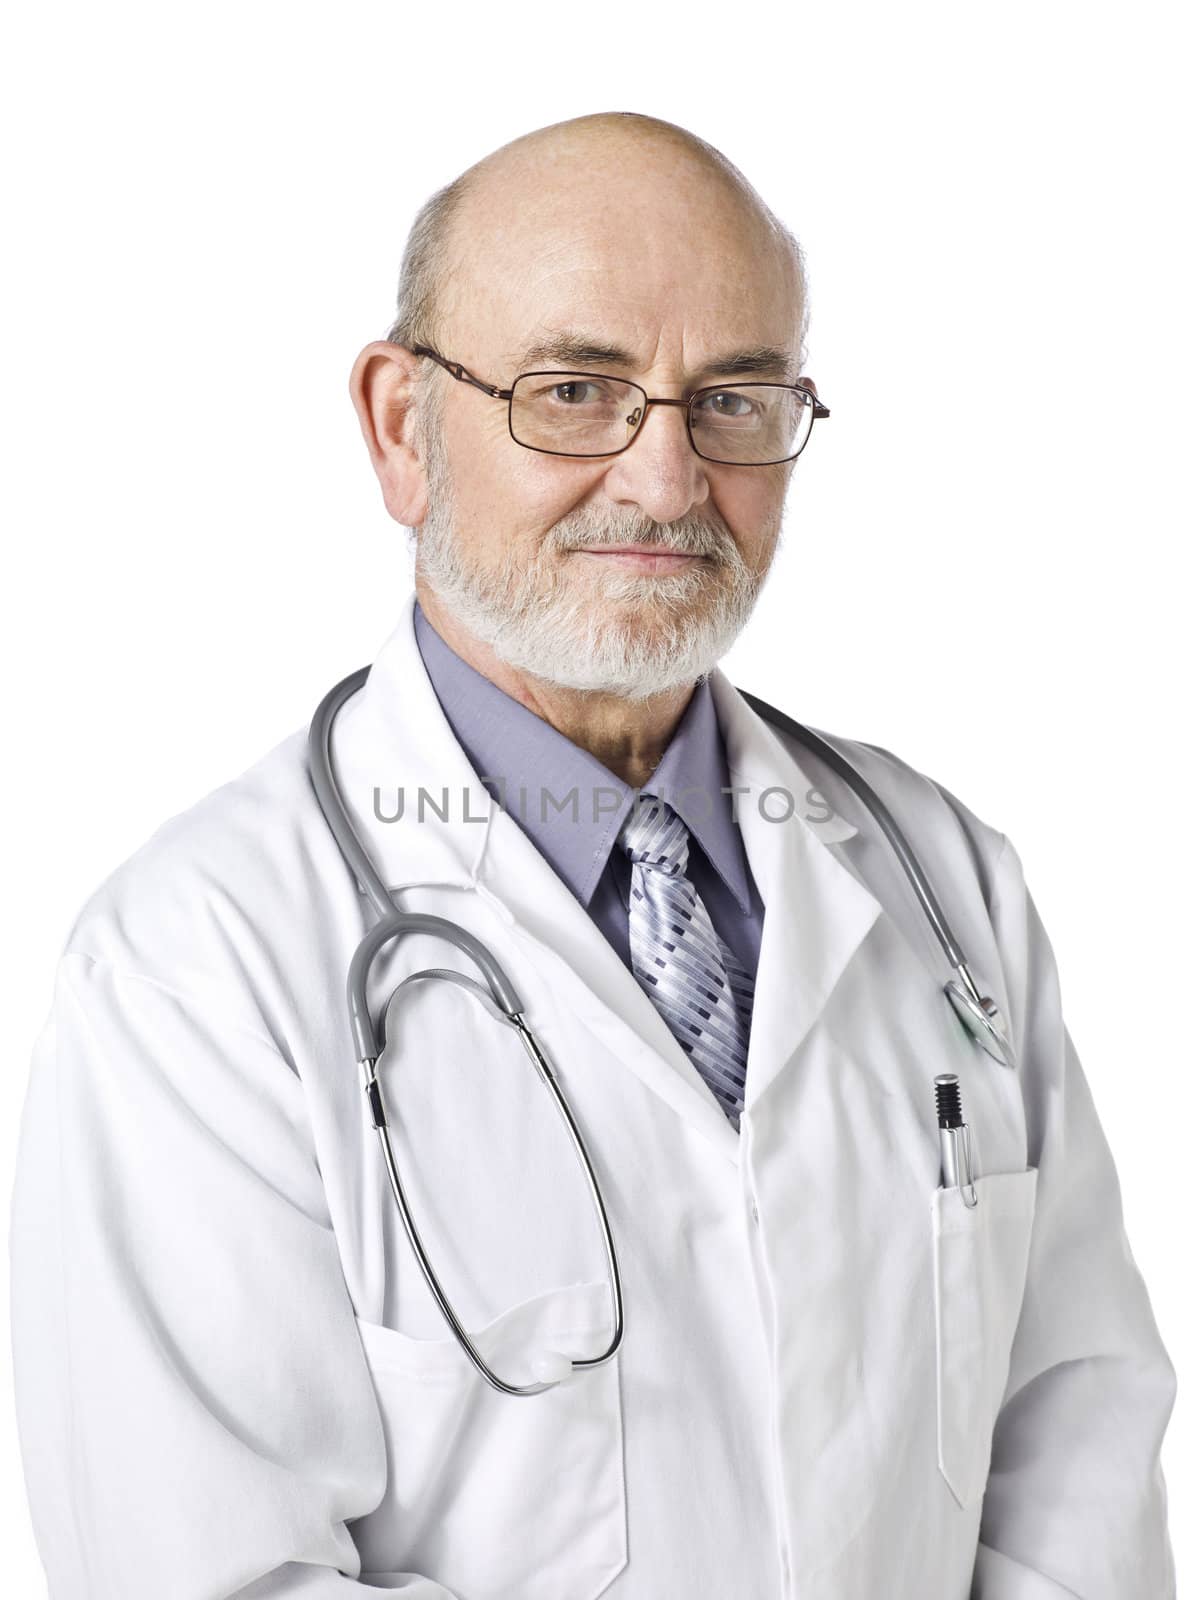 Close-up image of a happy doctor wearing a medical suit and stethoscope 